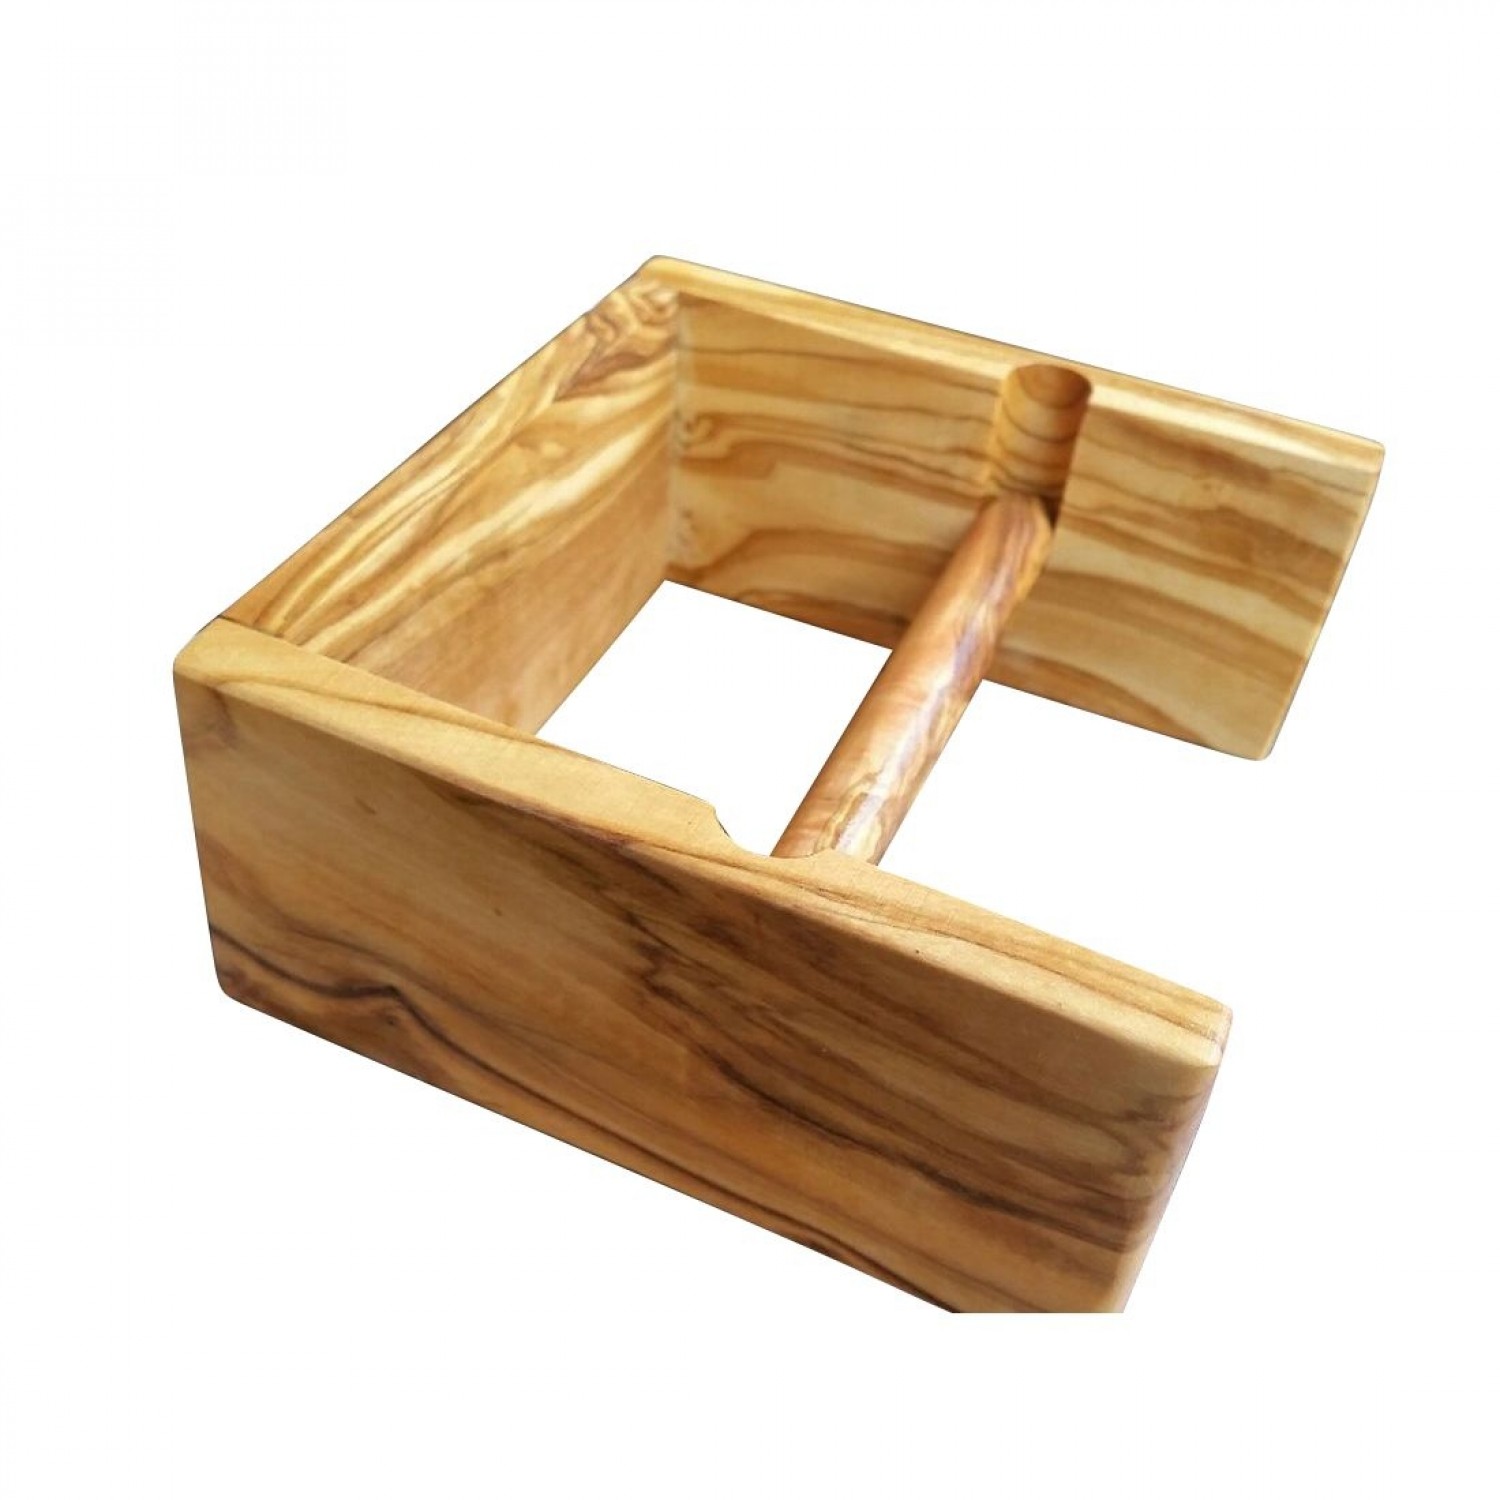 Toilet paper holder MUNICH made of olive wood, self-adhesive by D.O.M.